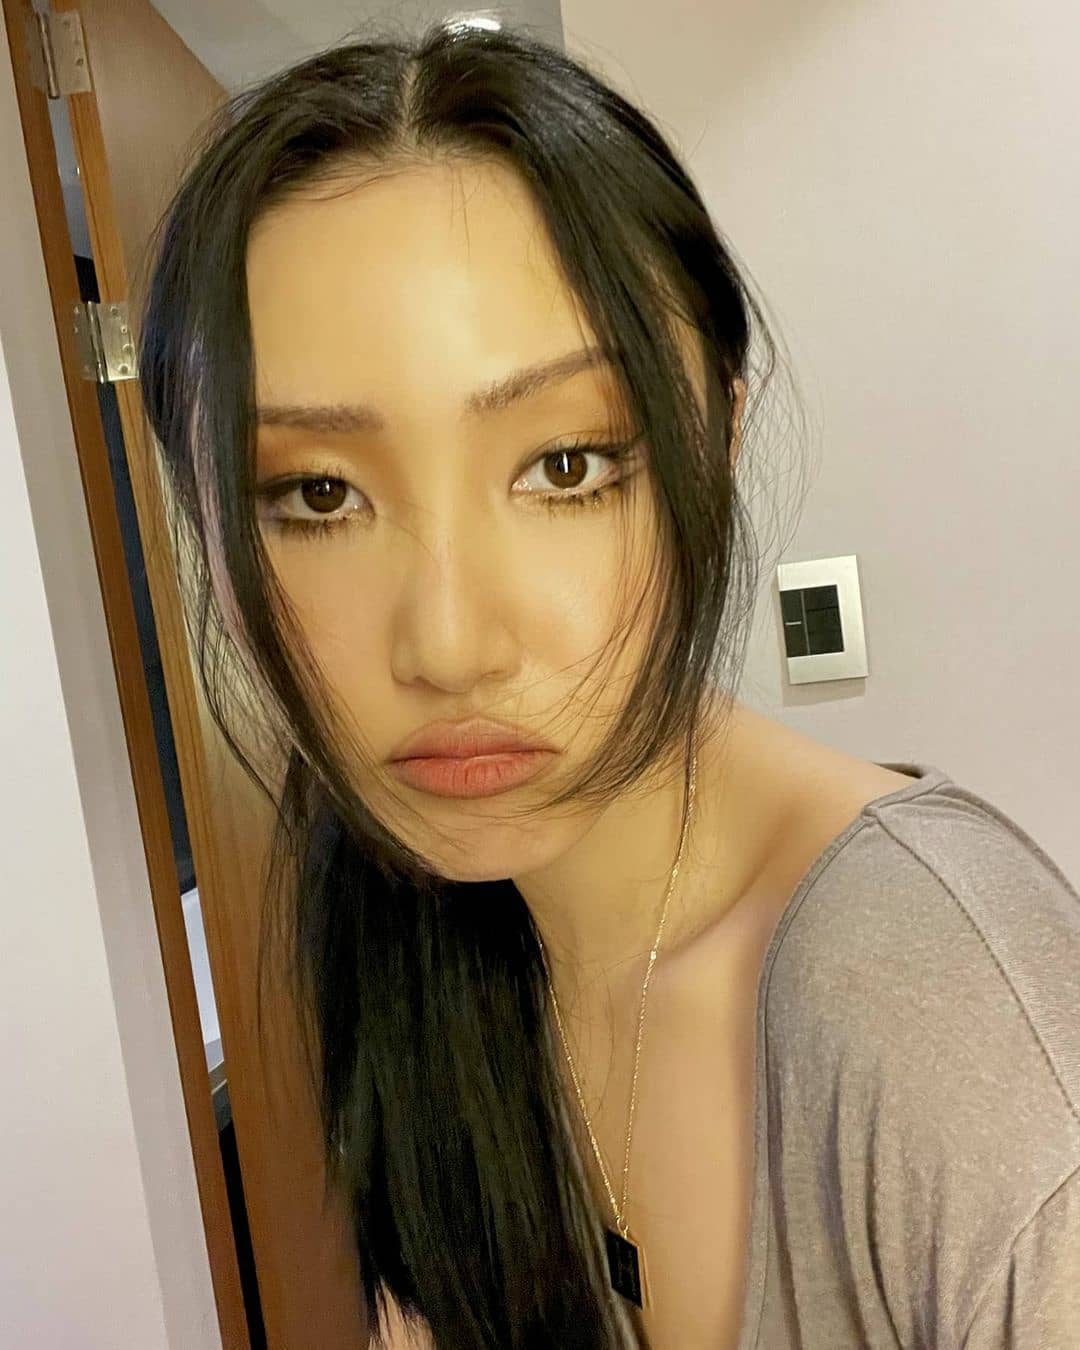 Mamamoo Hwasa, the sensuality of looking at me, Sexy queen